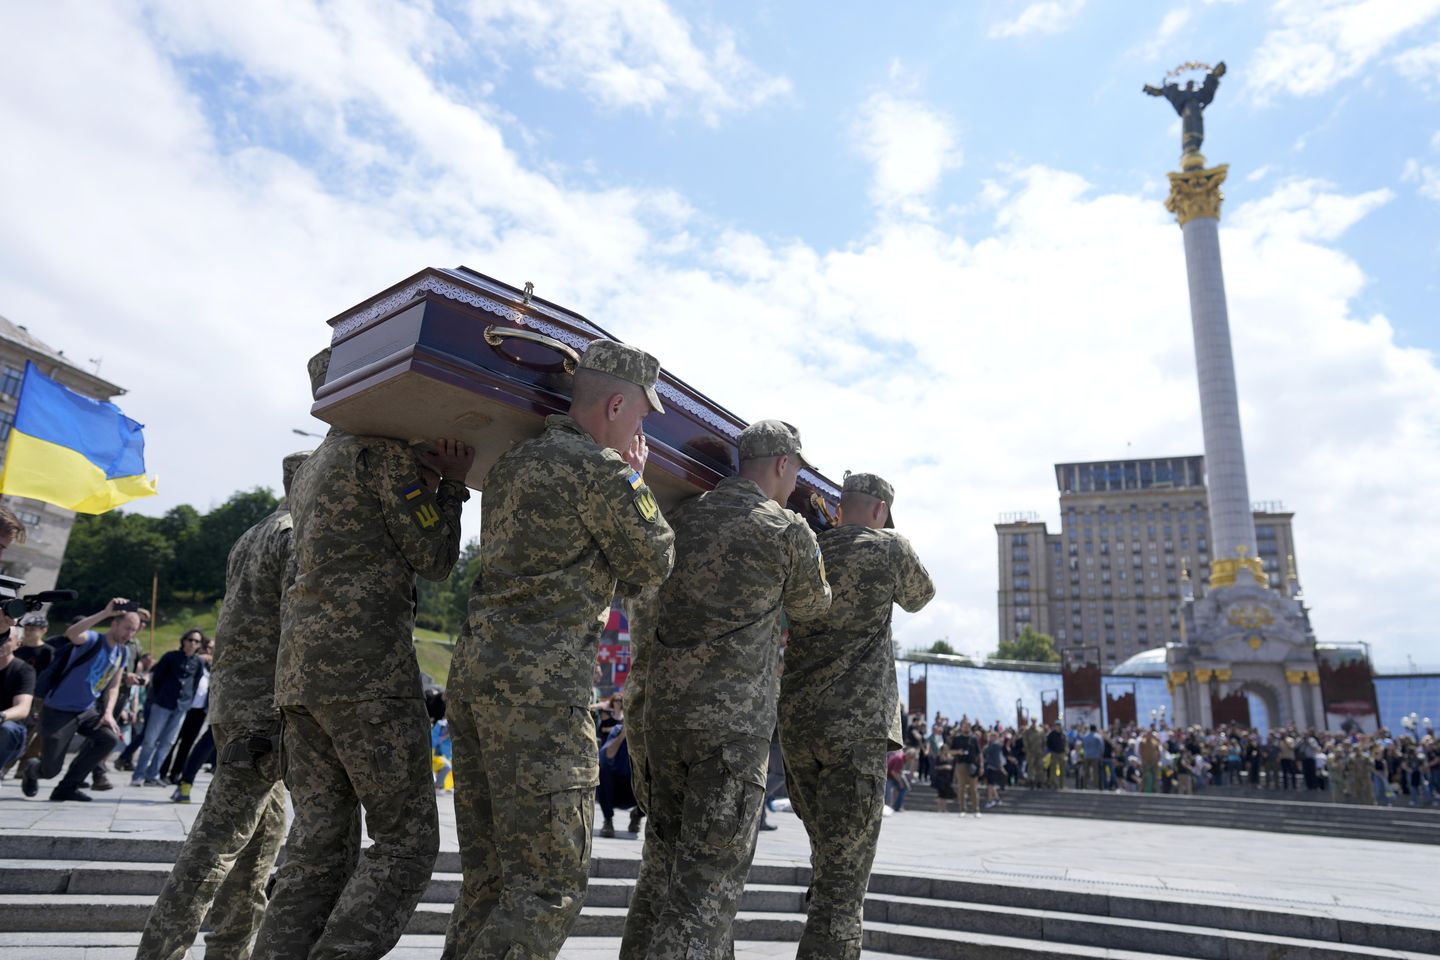 In Ukraine, funeral for activist killed and mourned in war